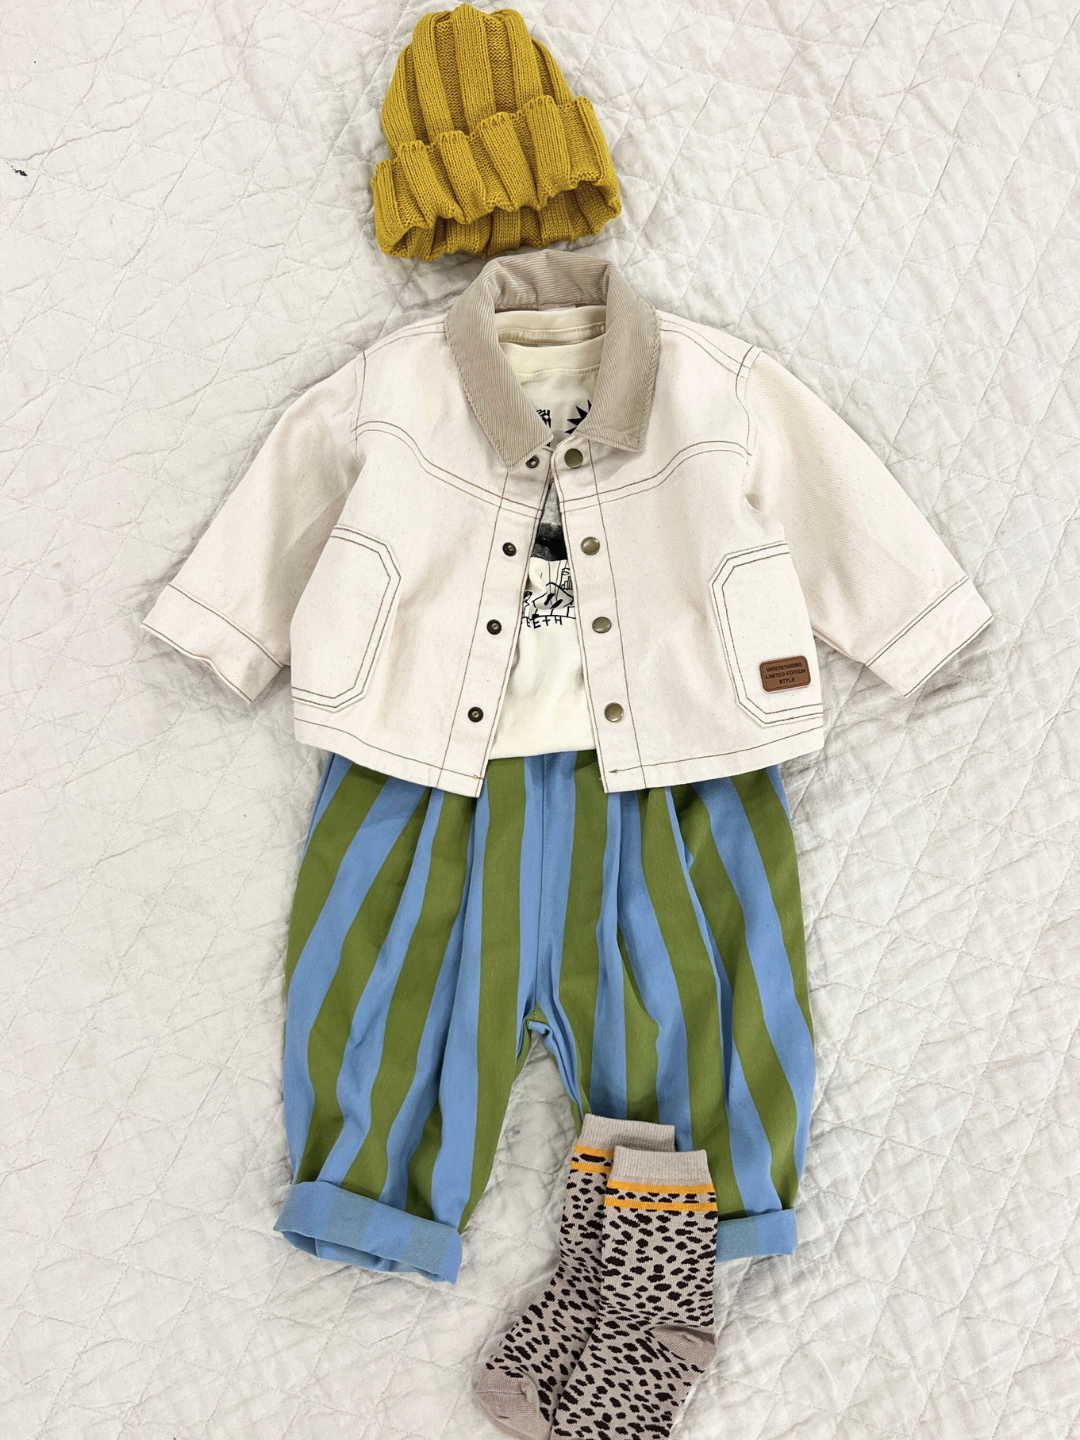 Front view of kids ecru denim jacket with beige corduroy collar. Jacket is shown open over a white t-shirt, and paired with a blue and white striped pant, a yellow beanie, and cheetah print socks.